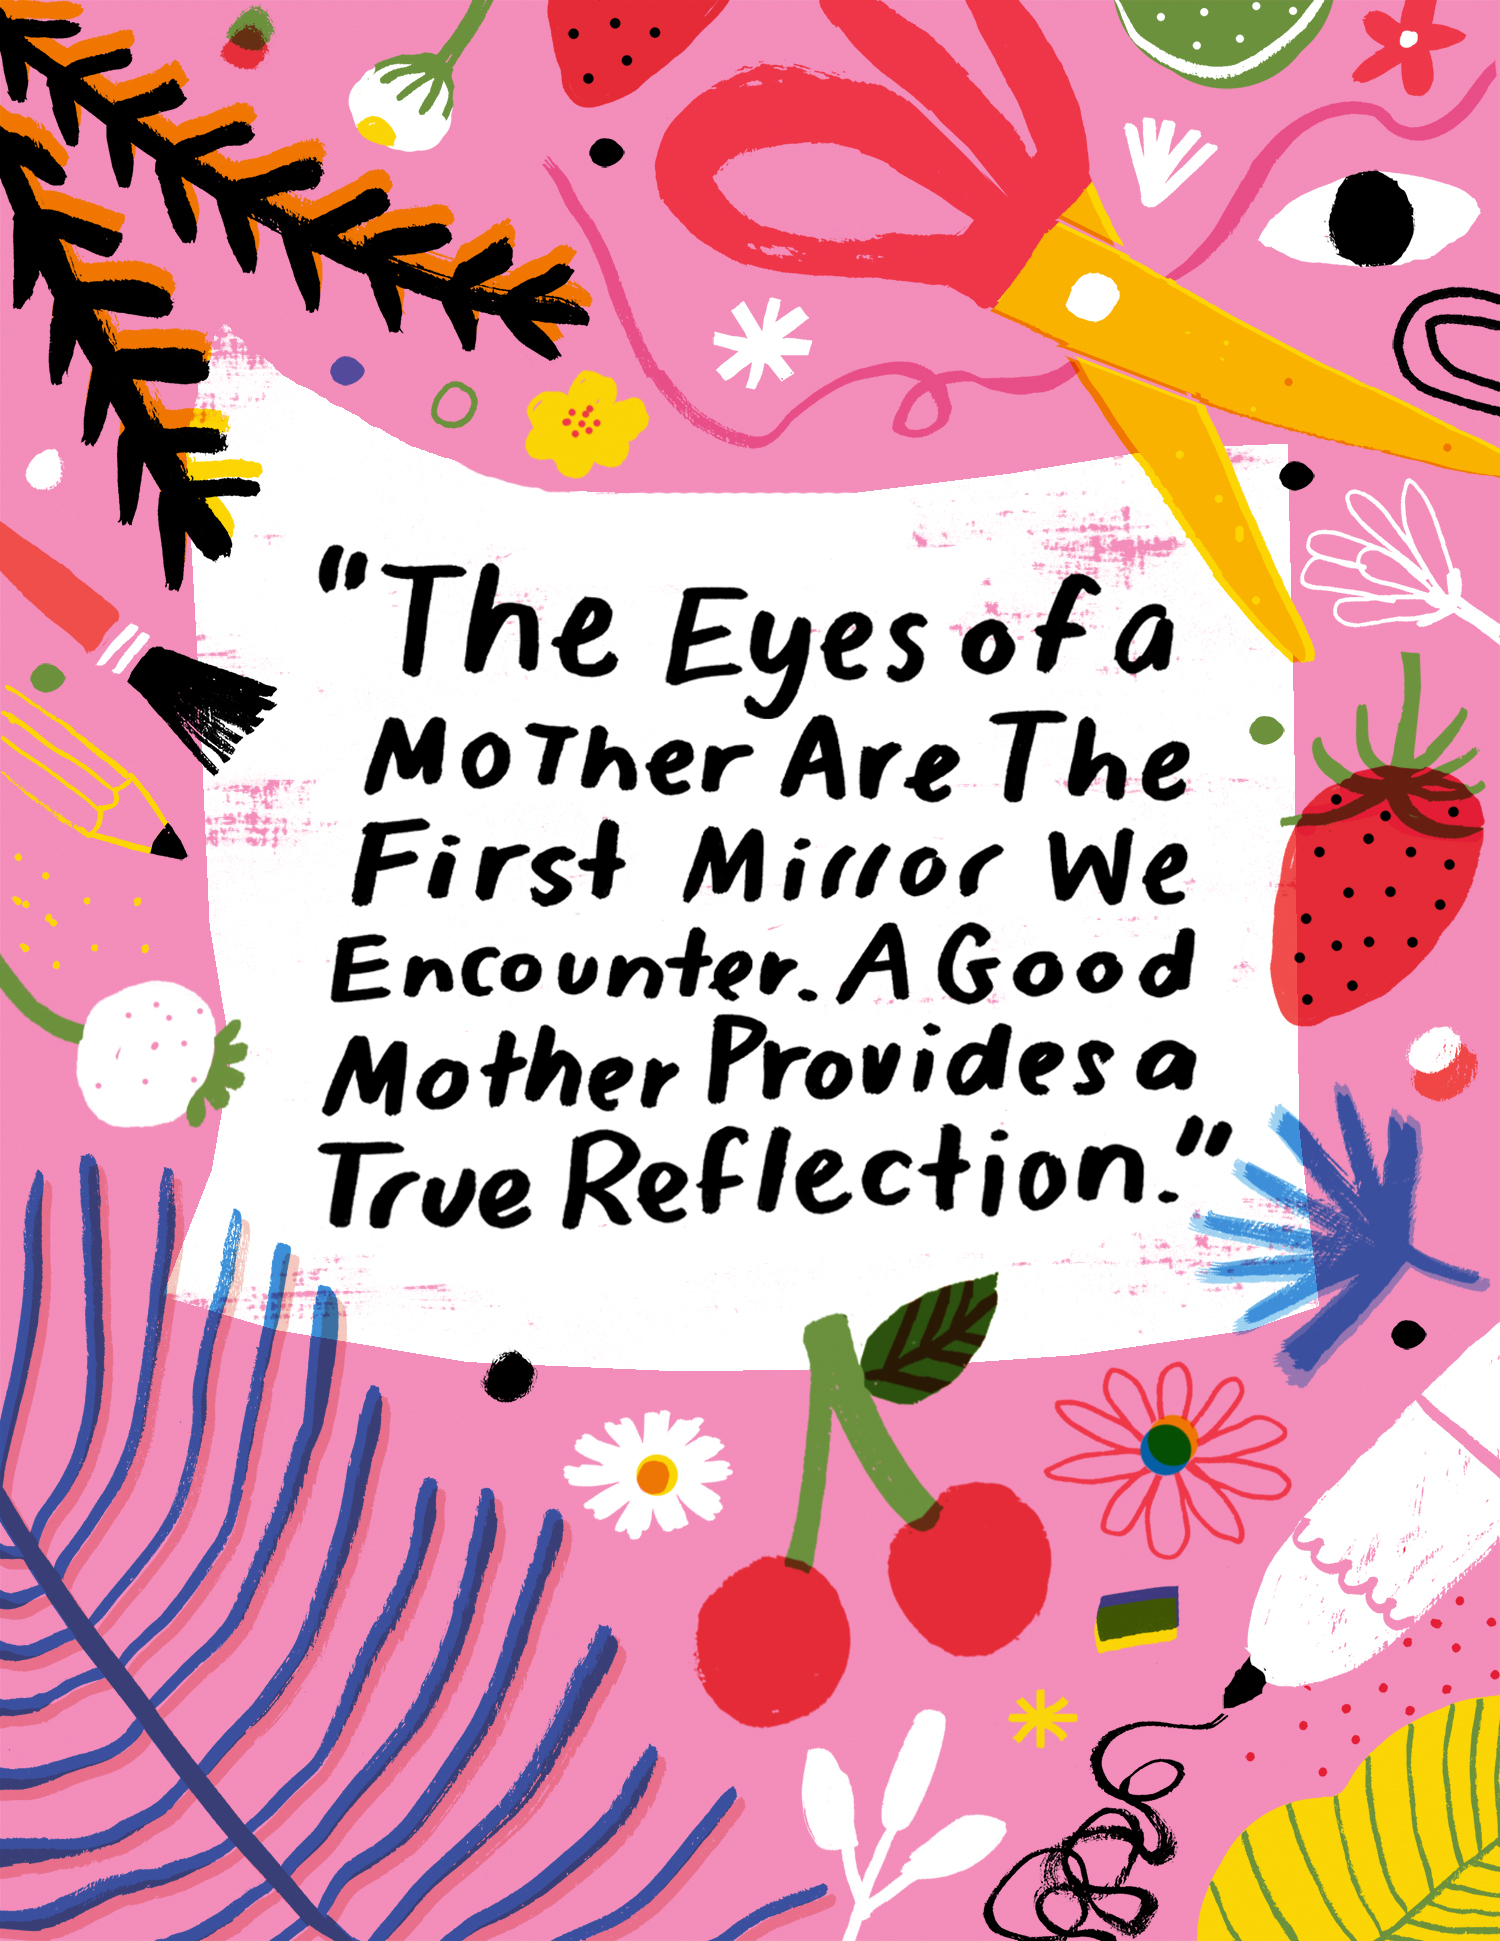 Mother's Day quote illustrated by Jordan Sondler for The House That Lars Built 